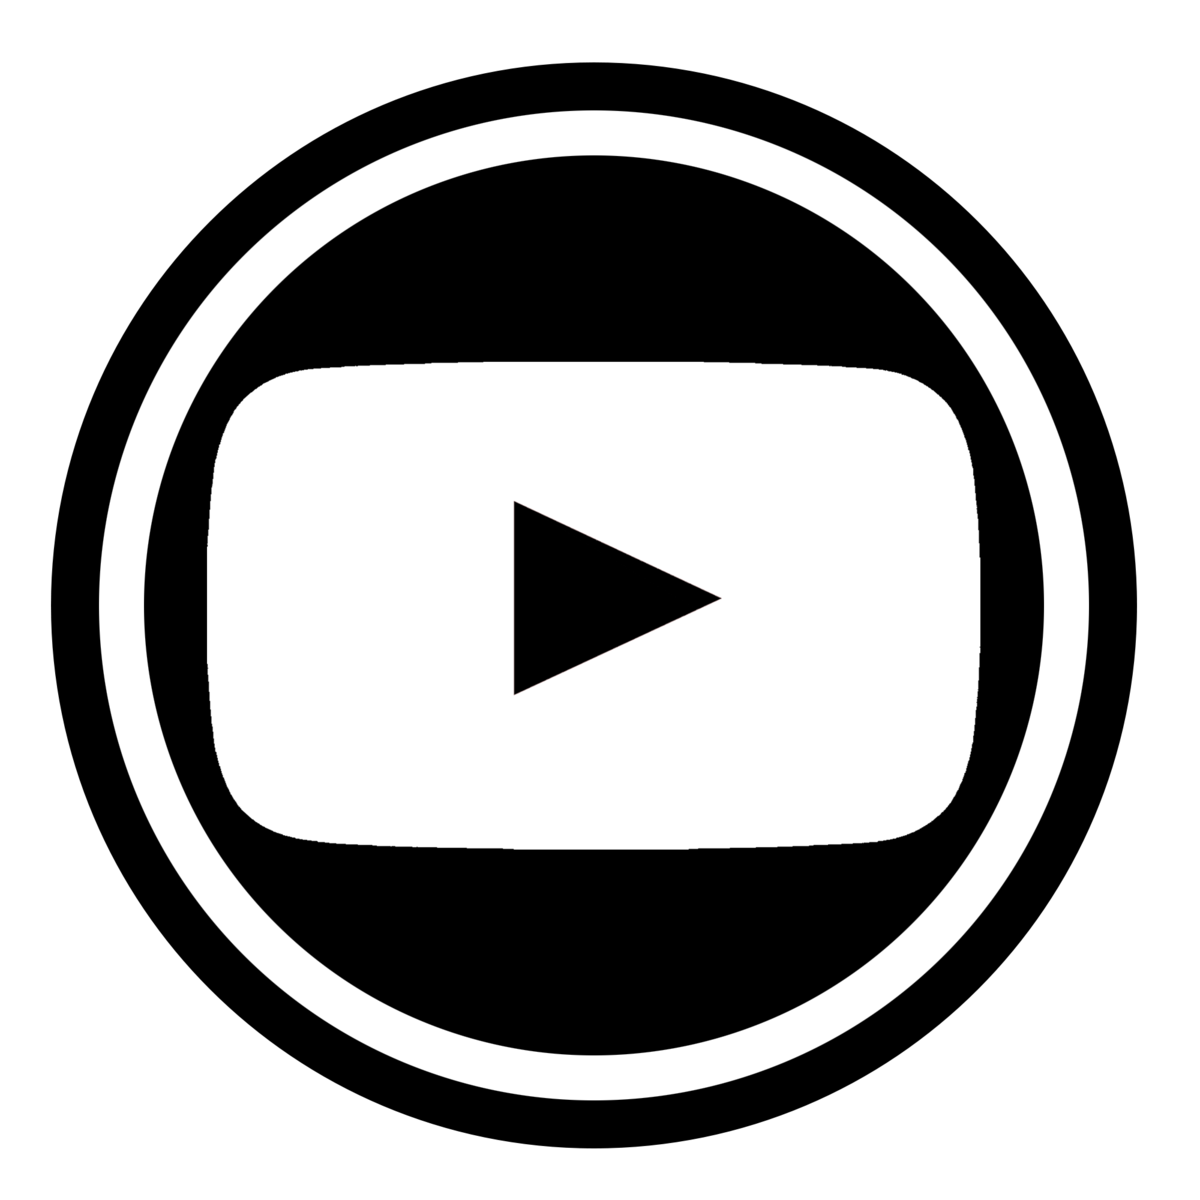 Youtube Subscribe Button Vector Hd Images, Youtube Black Subscribe Button,  Subscribe, Subscribe Png, Black Subscribe Png PNG Image For Free Download